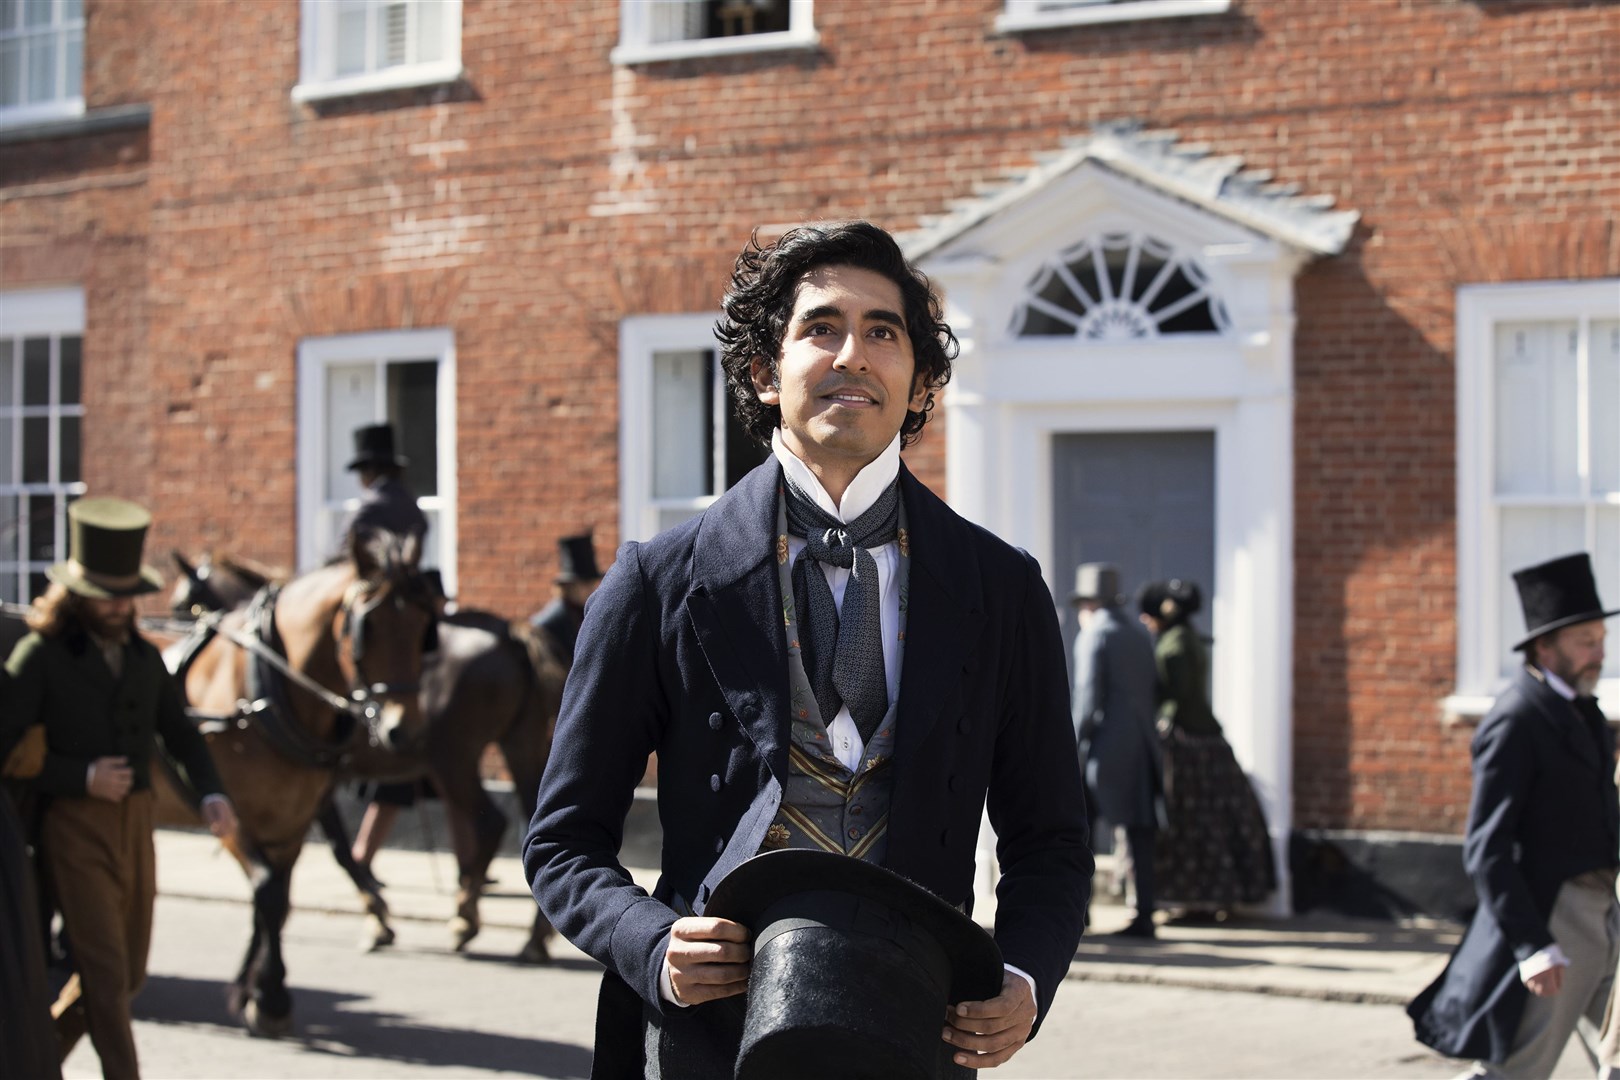 Dev Patel stars in The Personal History of David Copperfield, which will be the first film to be screened at the new Cromarty Cinema.